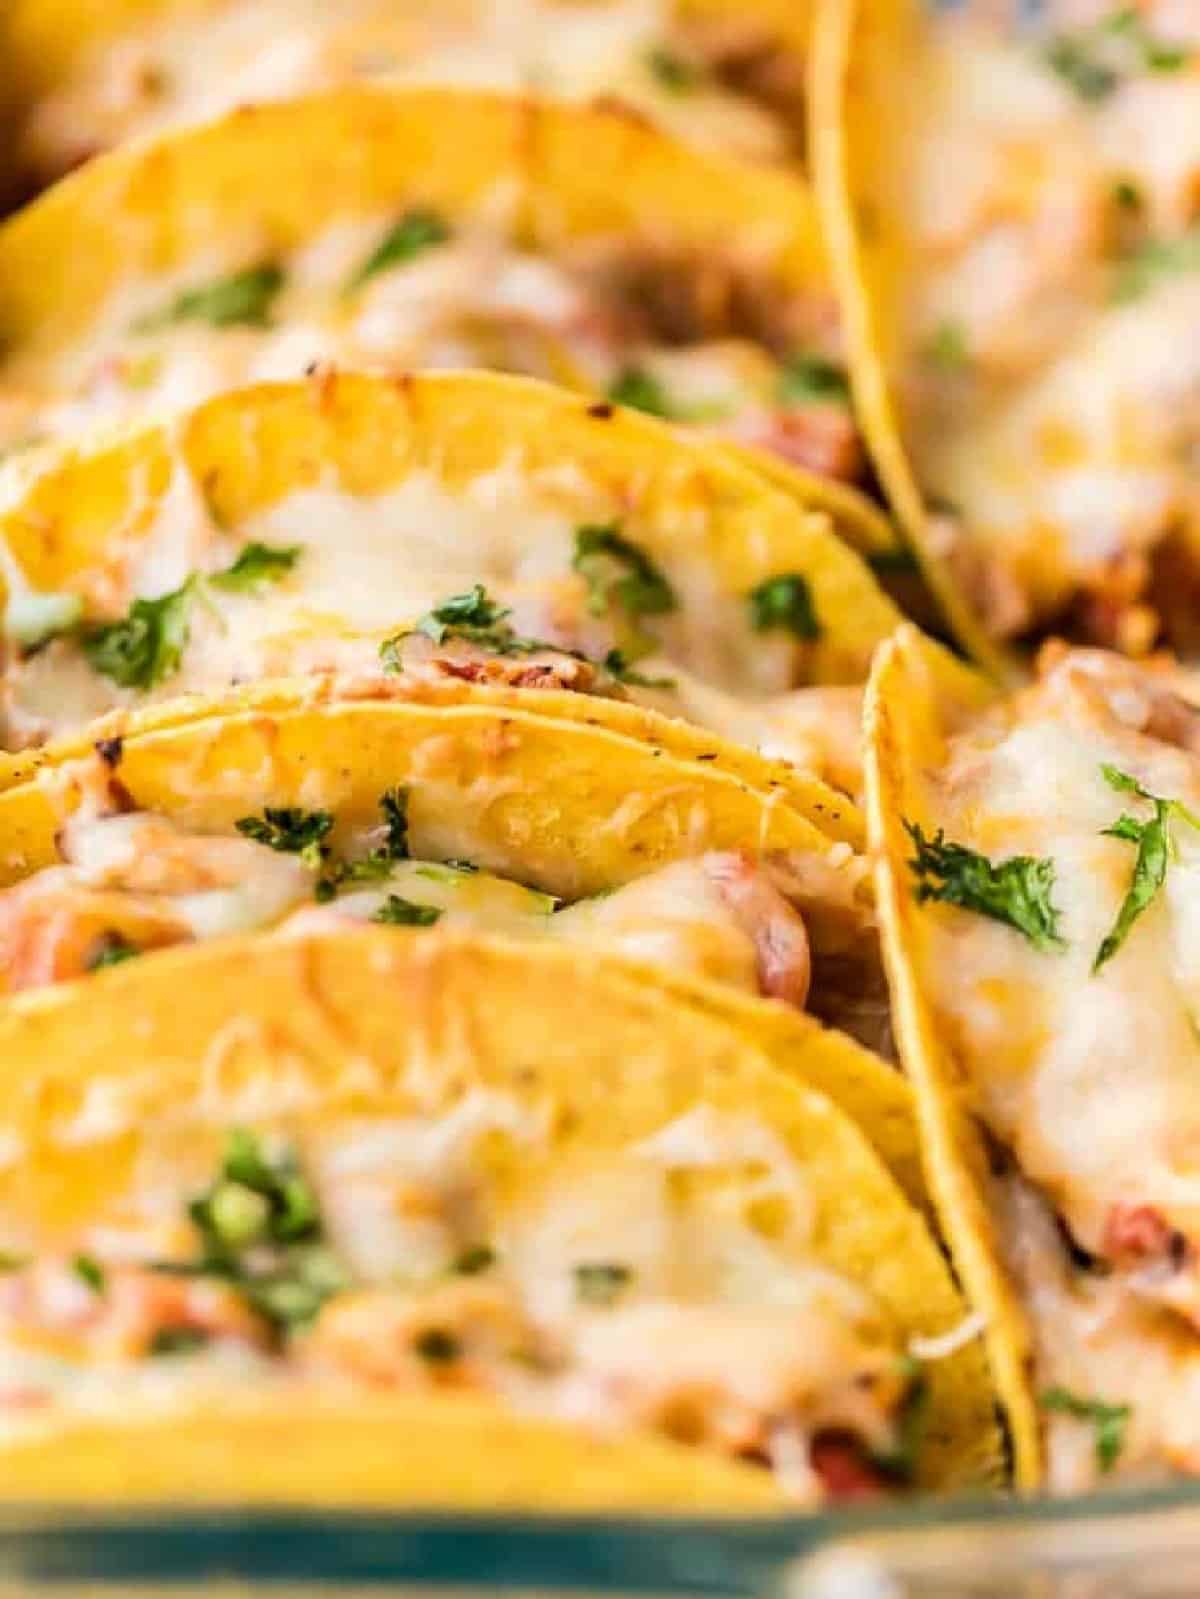 Cheesy chicken tacos baked in a casserole dish.